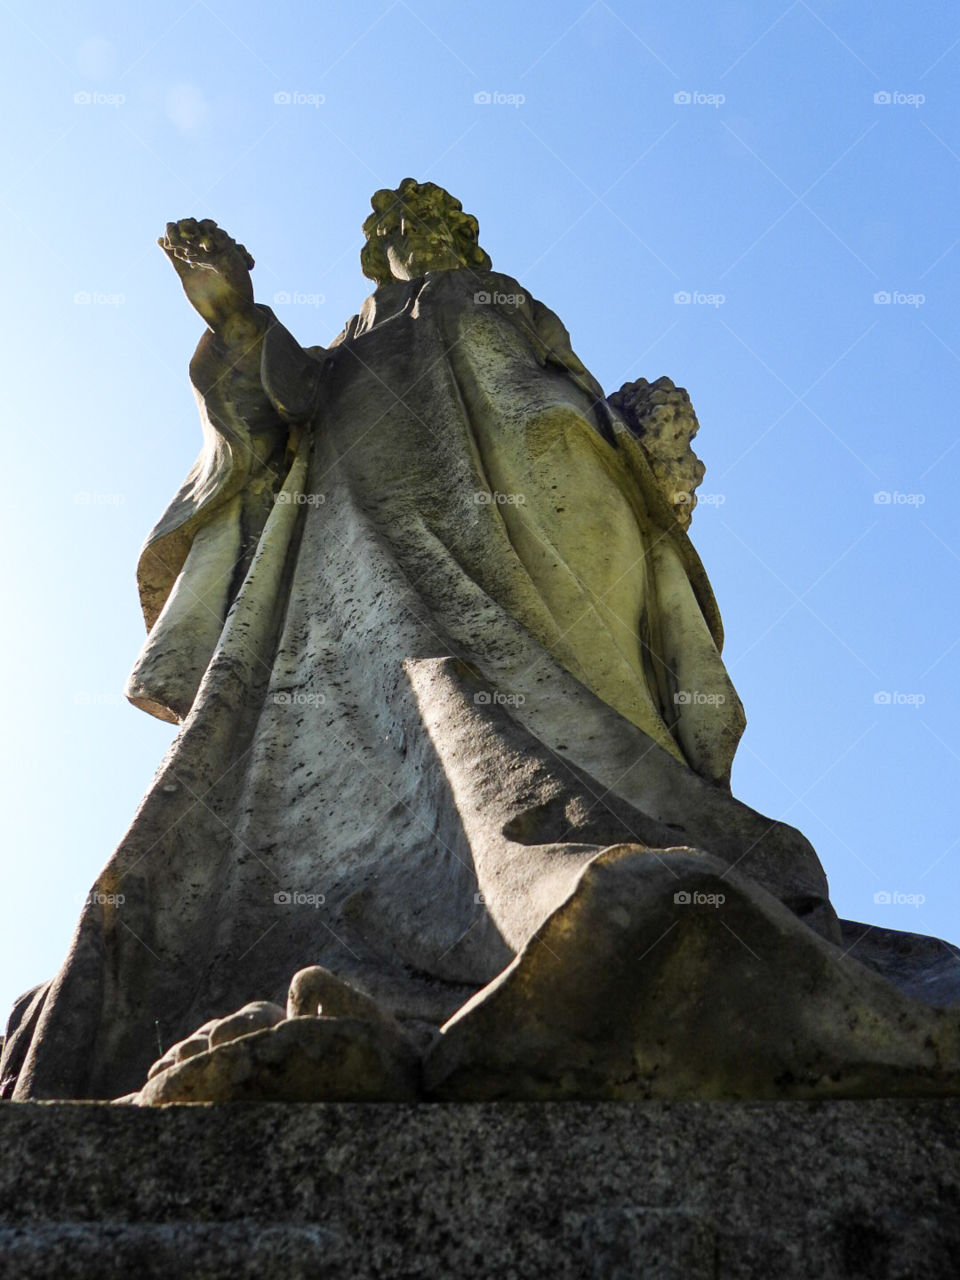 shot of cemetery statue from low angle